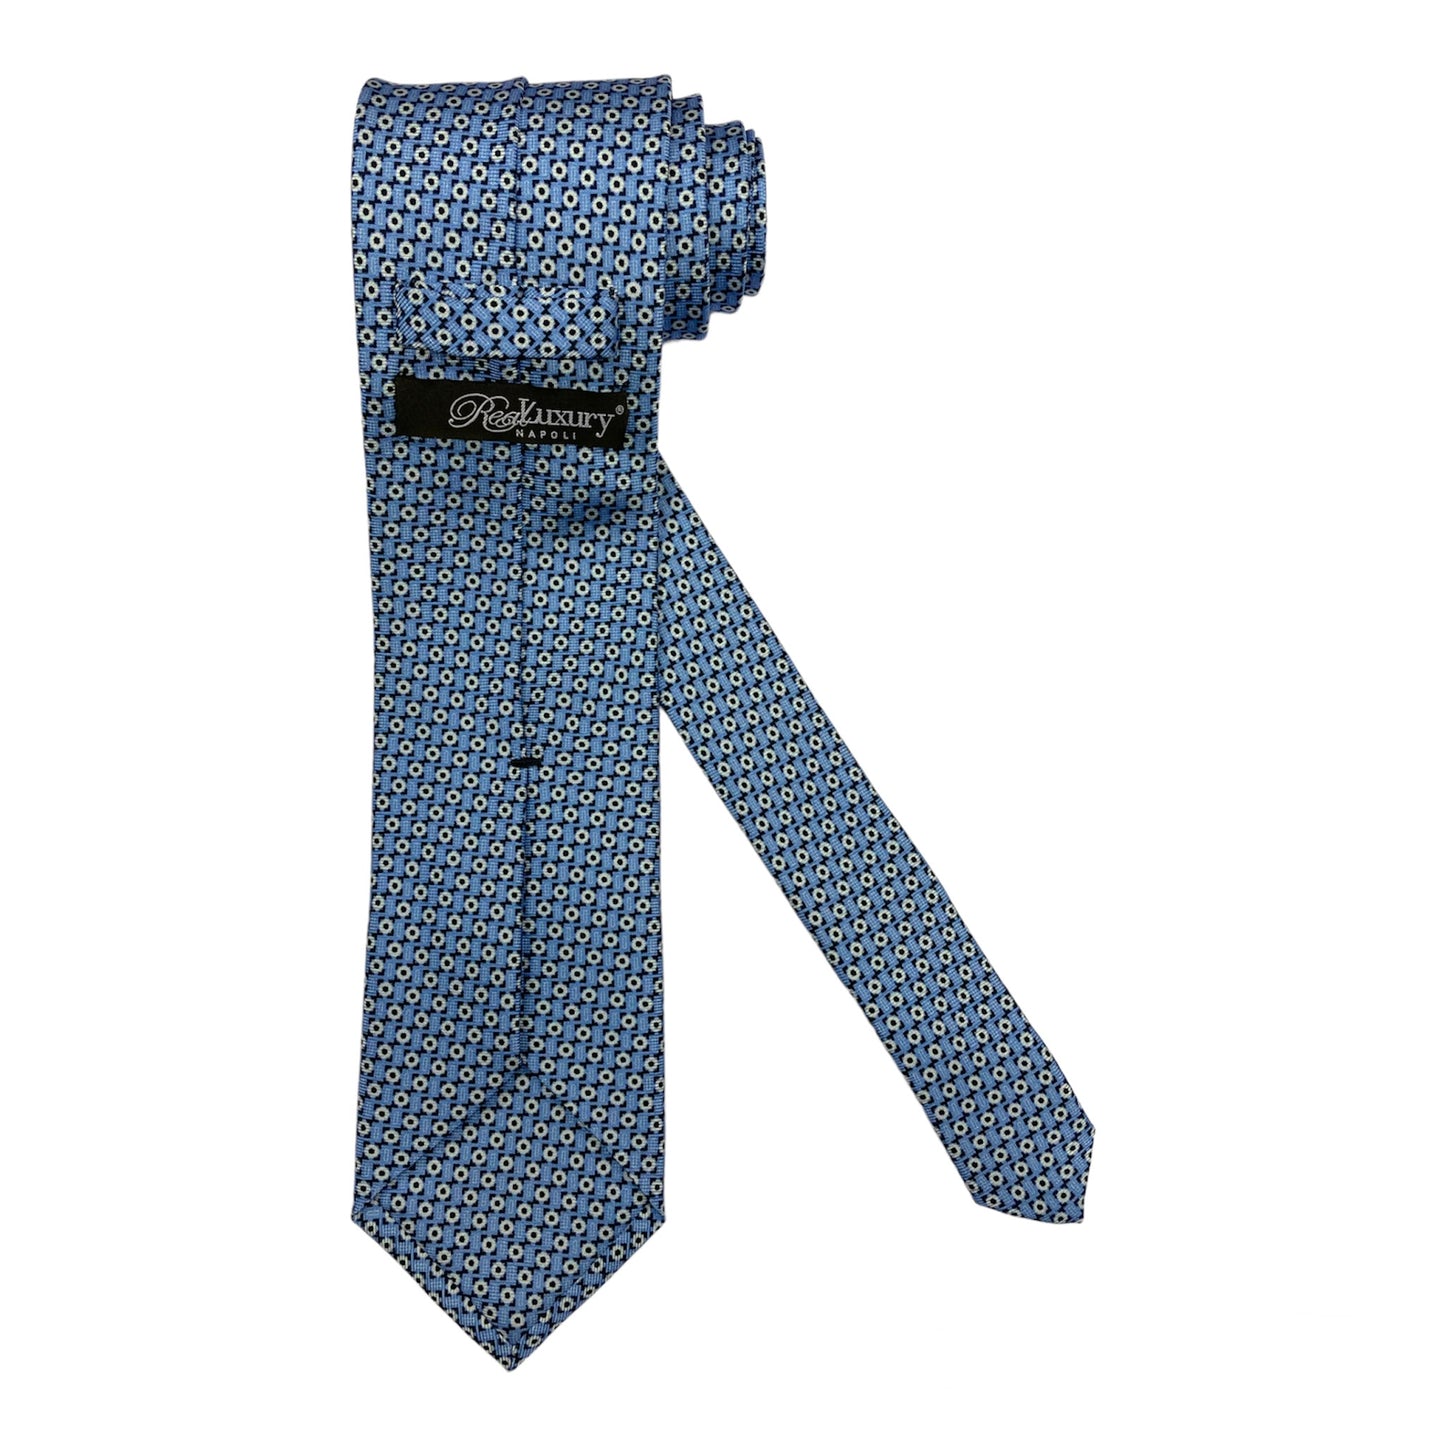 Light blue silk tie with white polka dots and blue edges